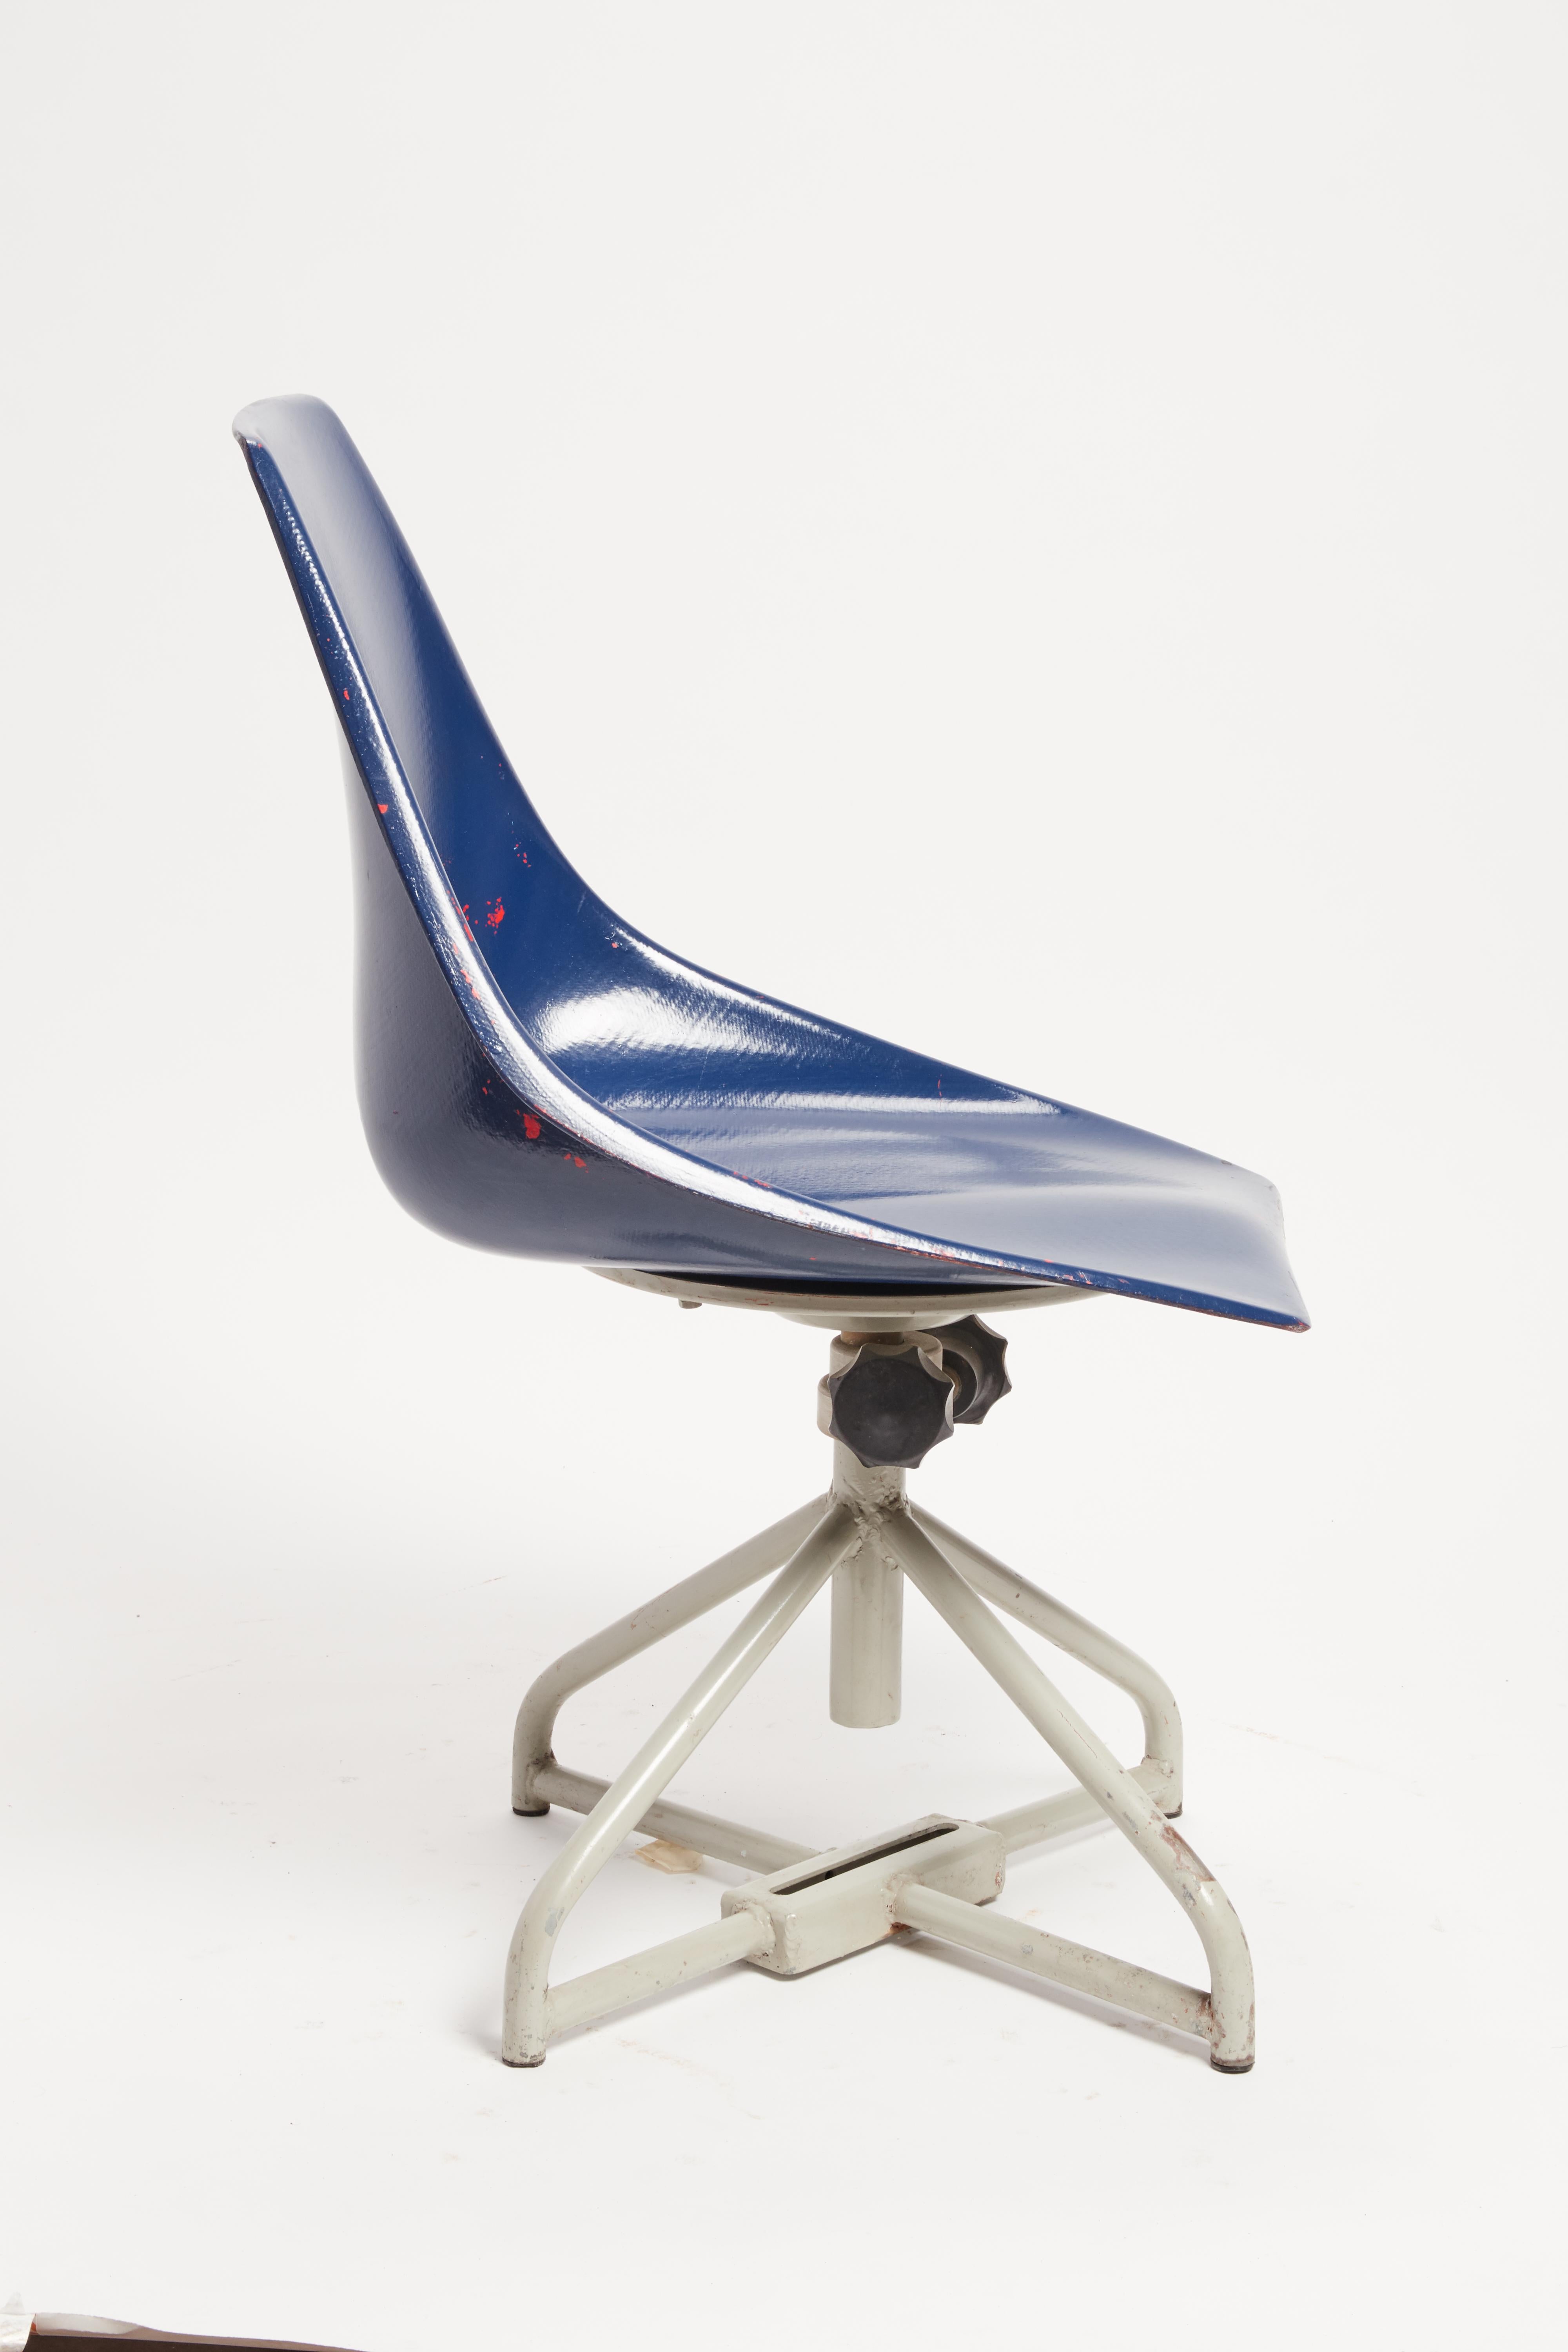 Multicolor Adjustable Fiberglass Chairs, Italy, 1950 For Sale 10